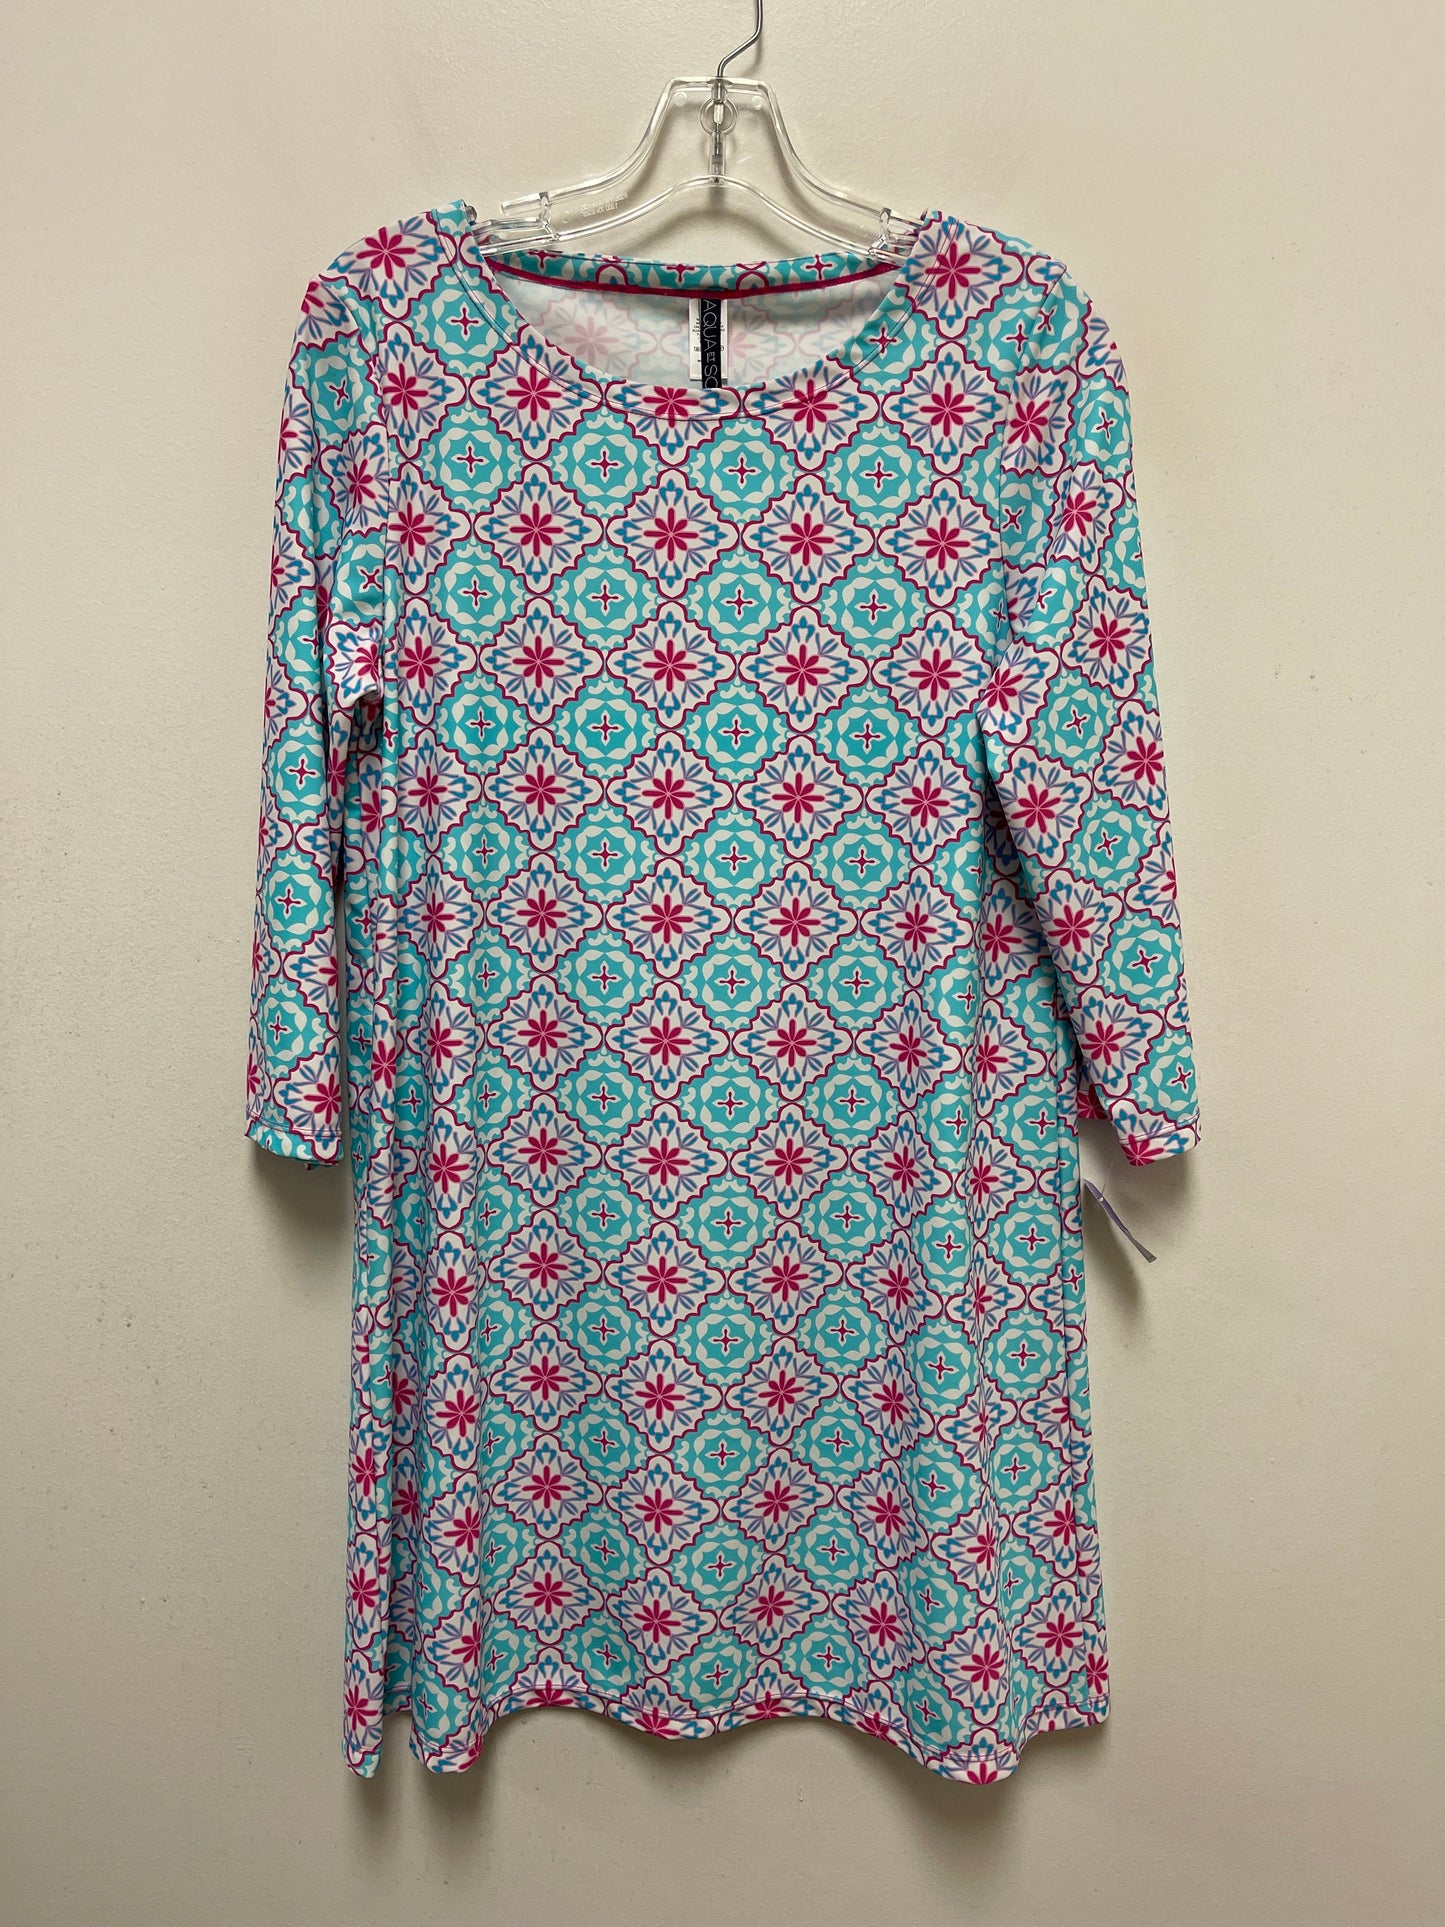 Blue & Pink Dress Casual Midi Clothes Mentor, Size S